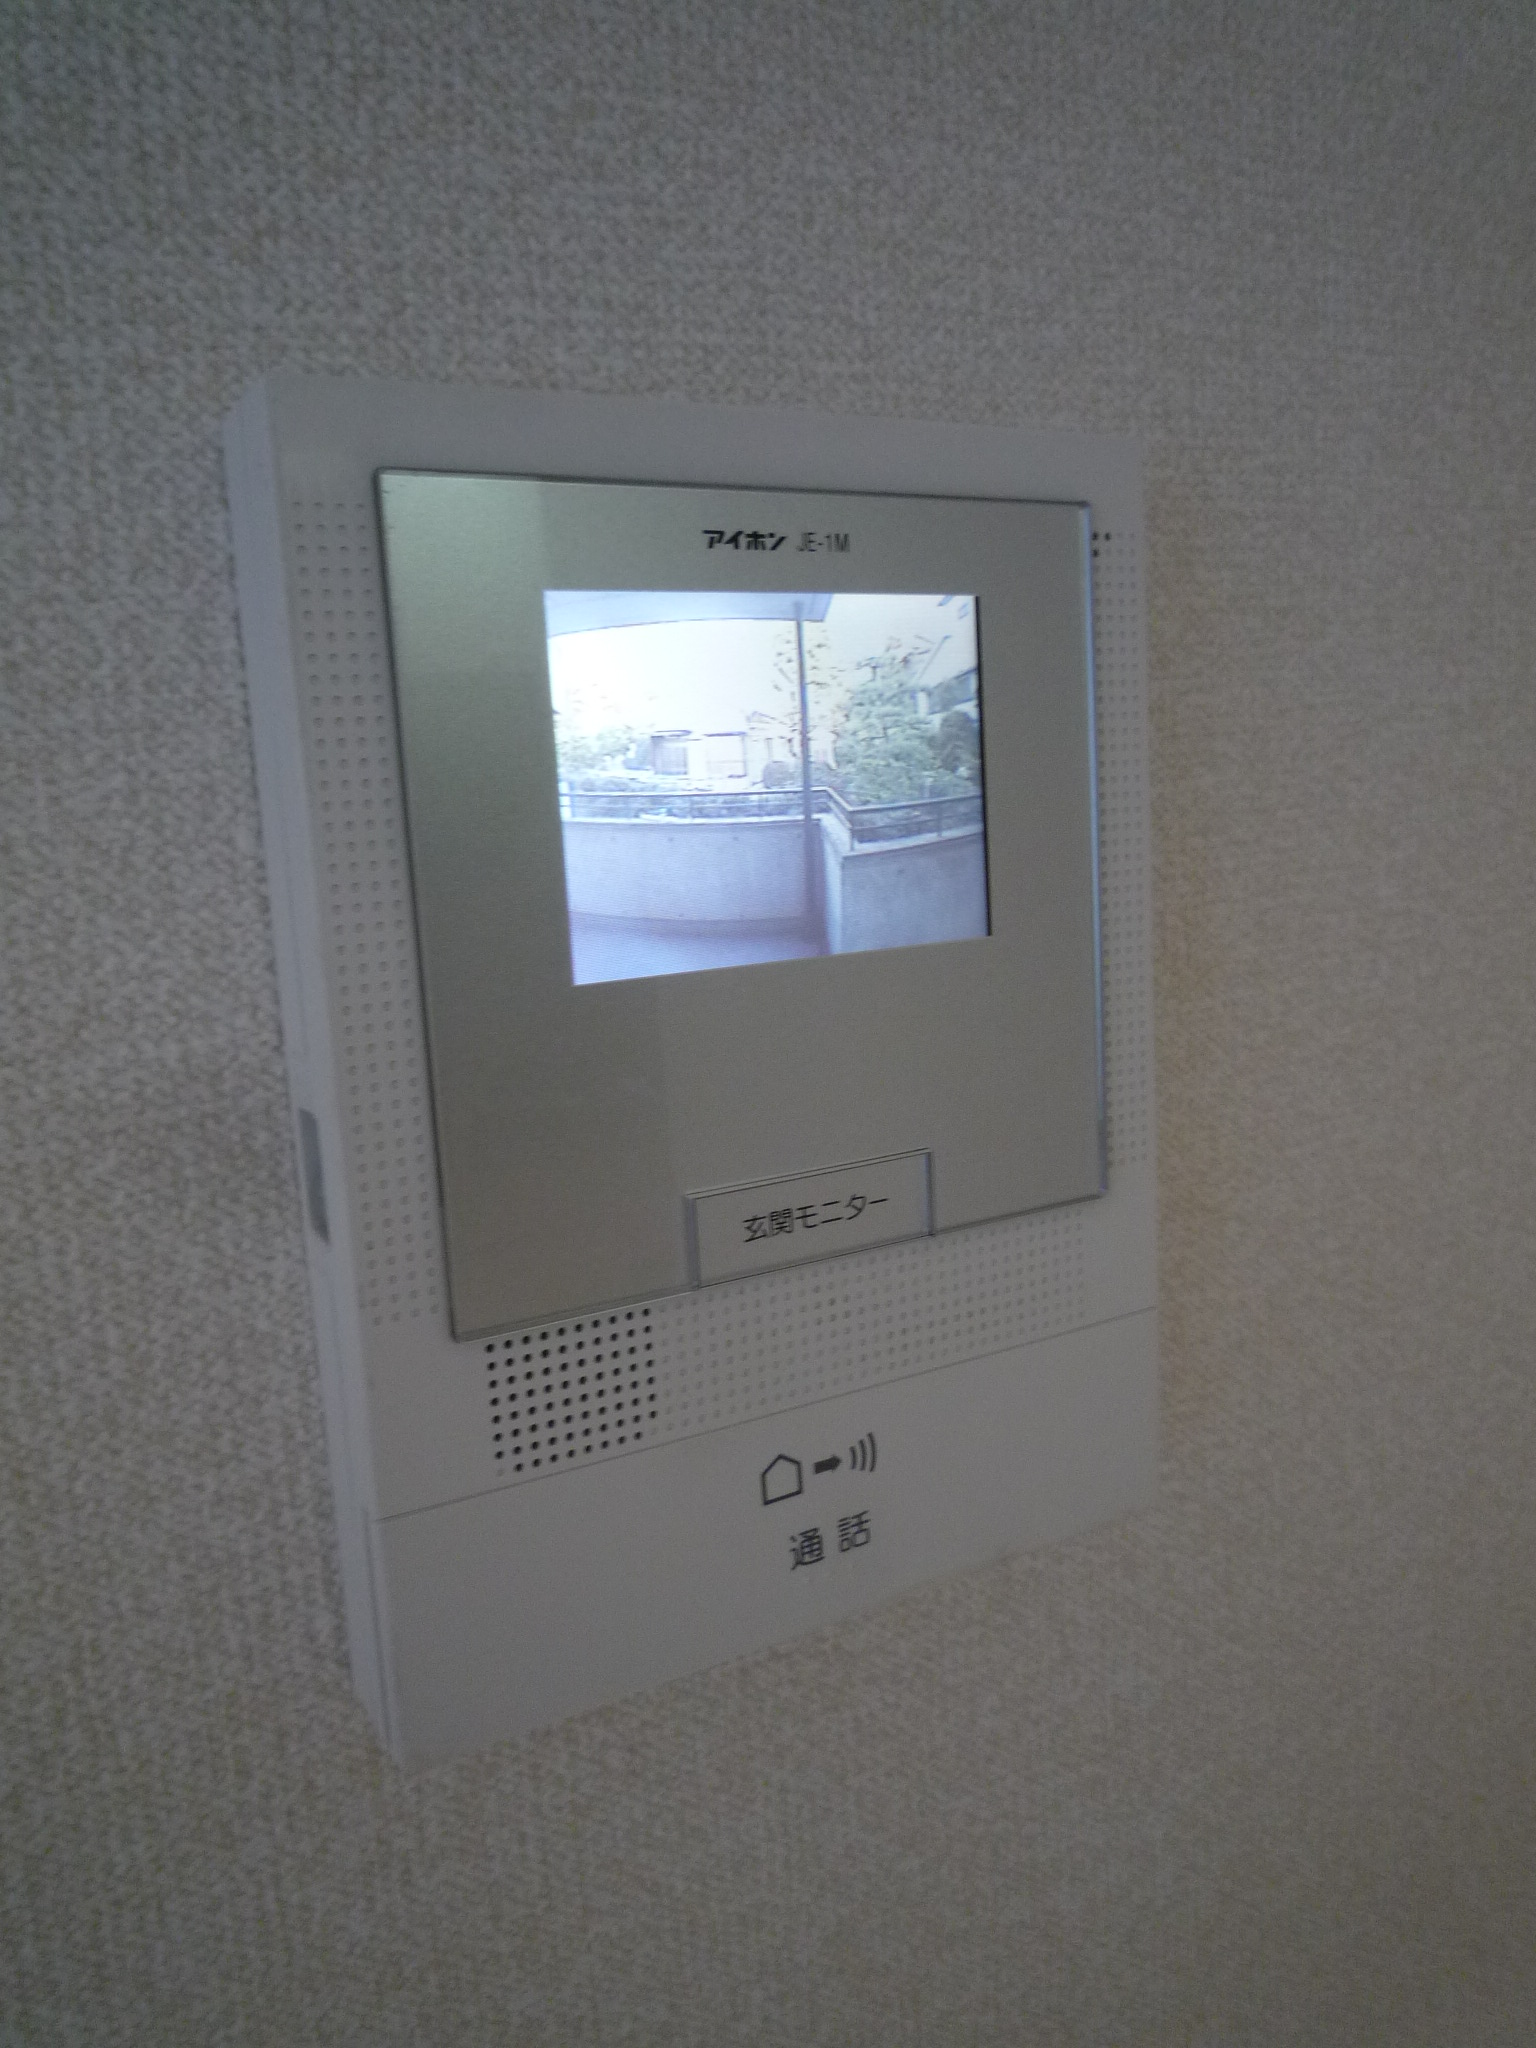 Security. Intercom with a camera (new) was Mashi attached.